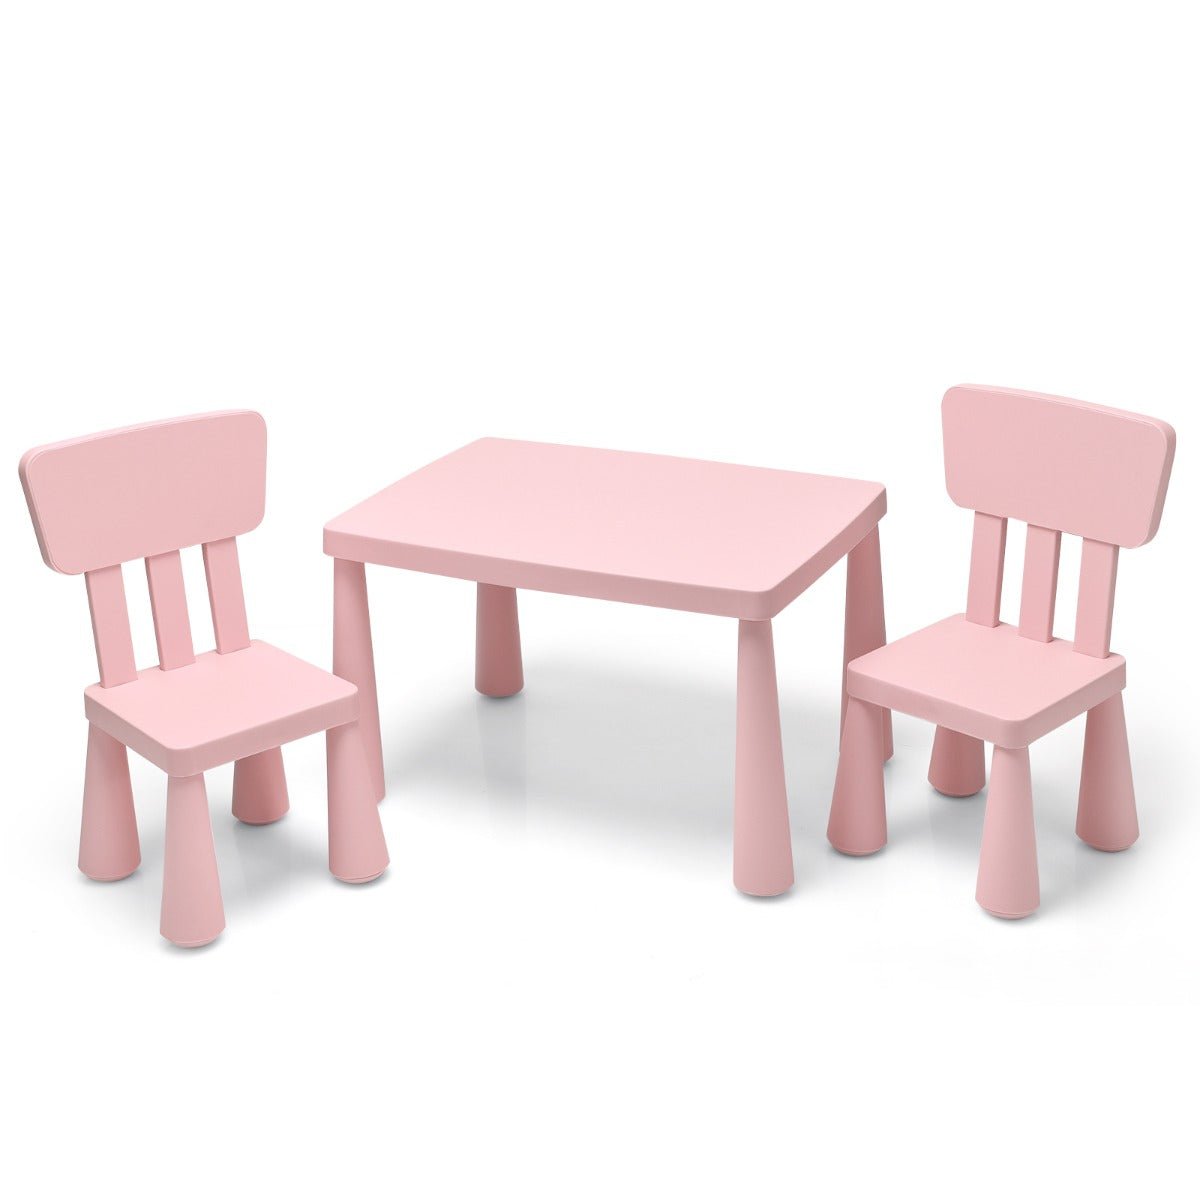 Pink Kids Table Set with 2 Chairs - Reading Nook for Little Ones